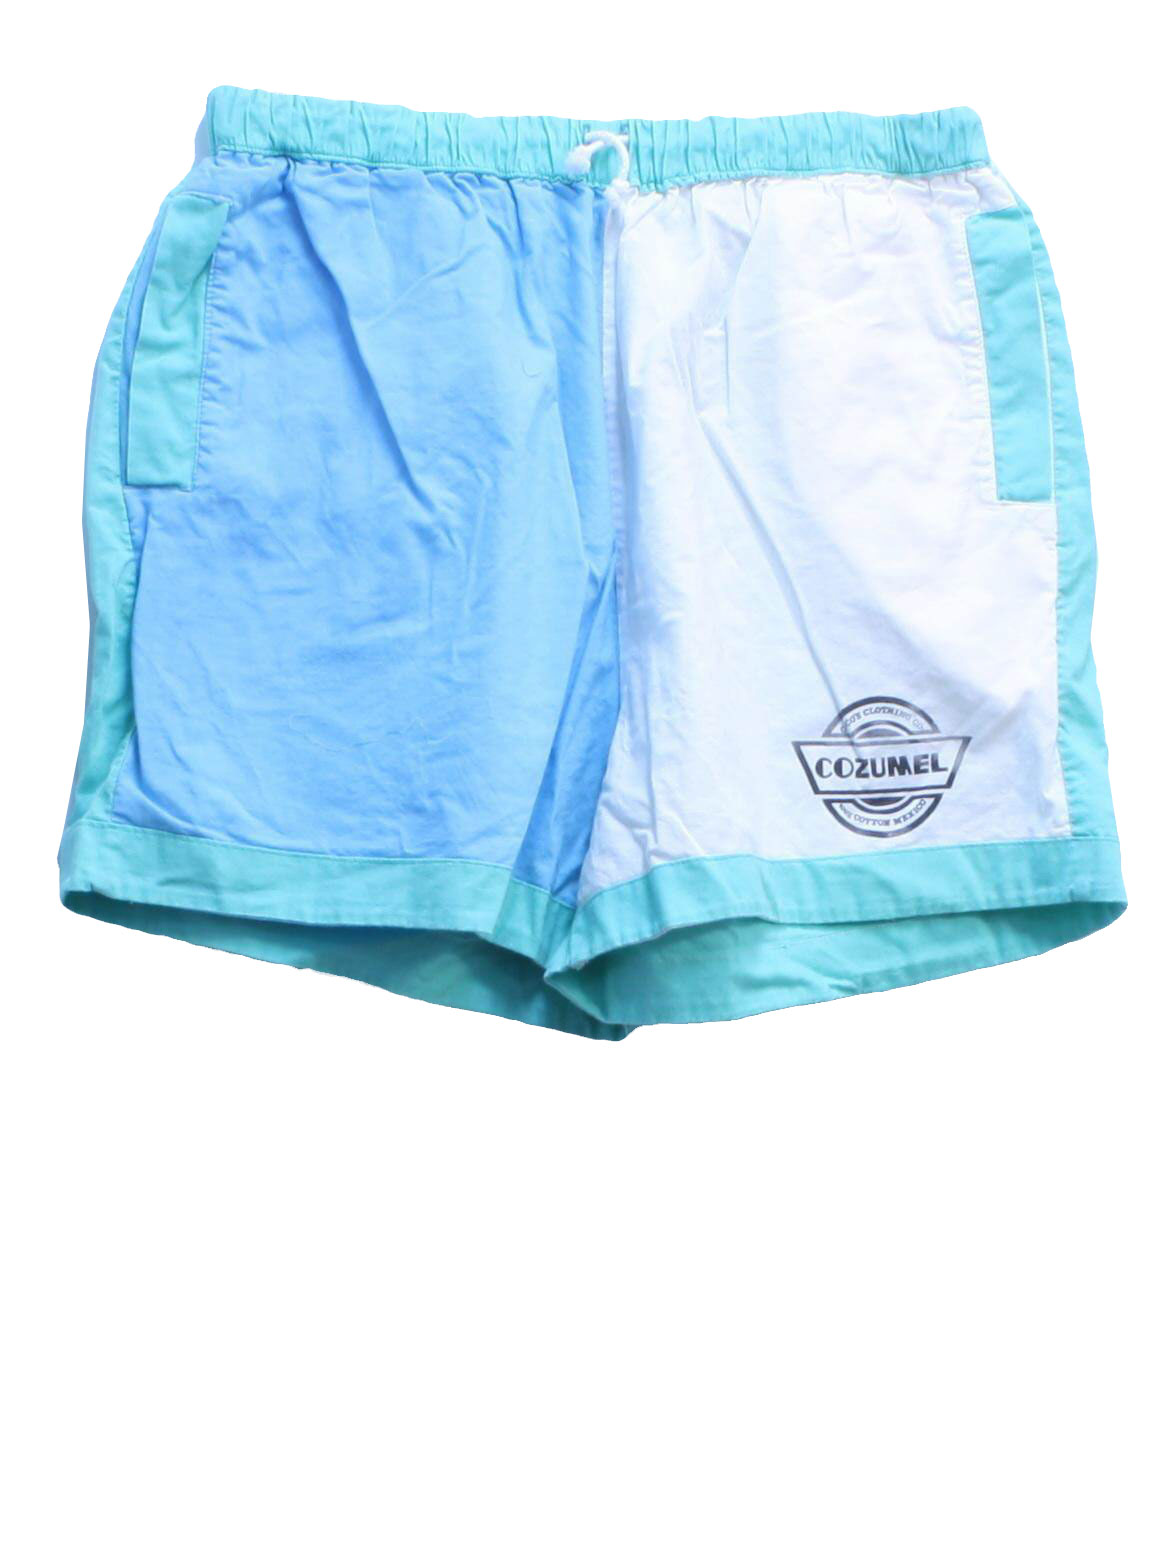 Vintage CoCos 80's Shorts: 80s -CoCos- Mens teal green, light blue and ...